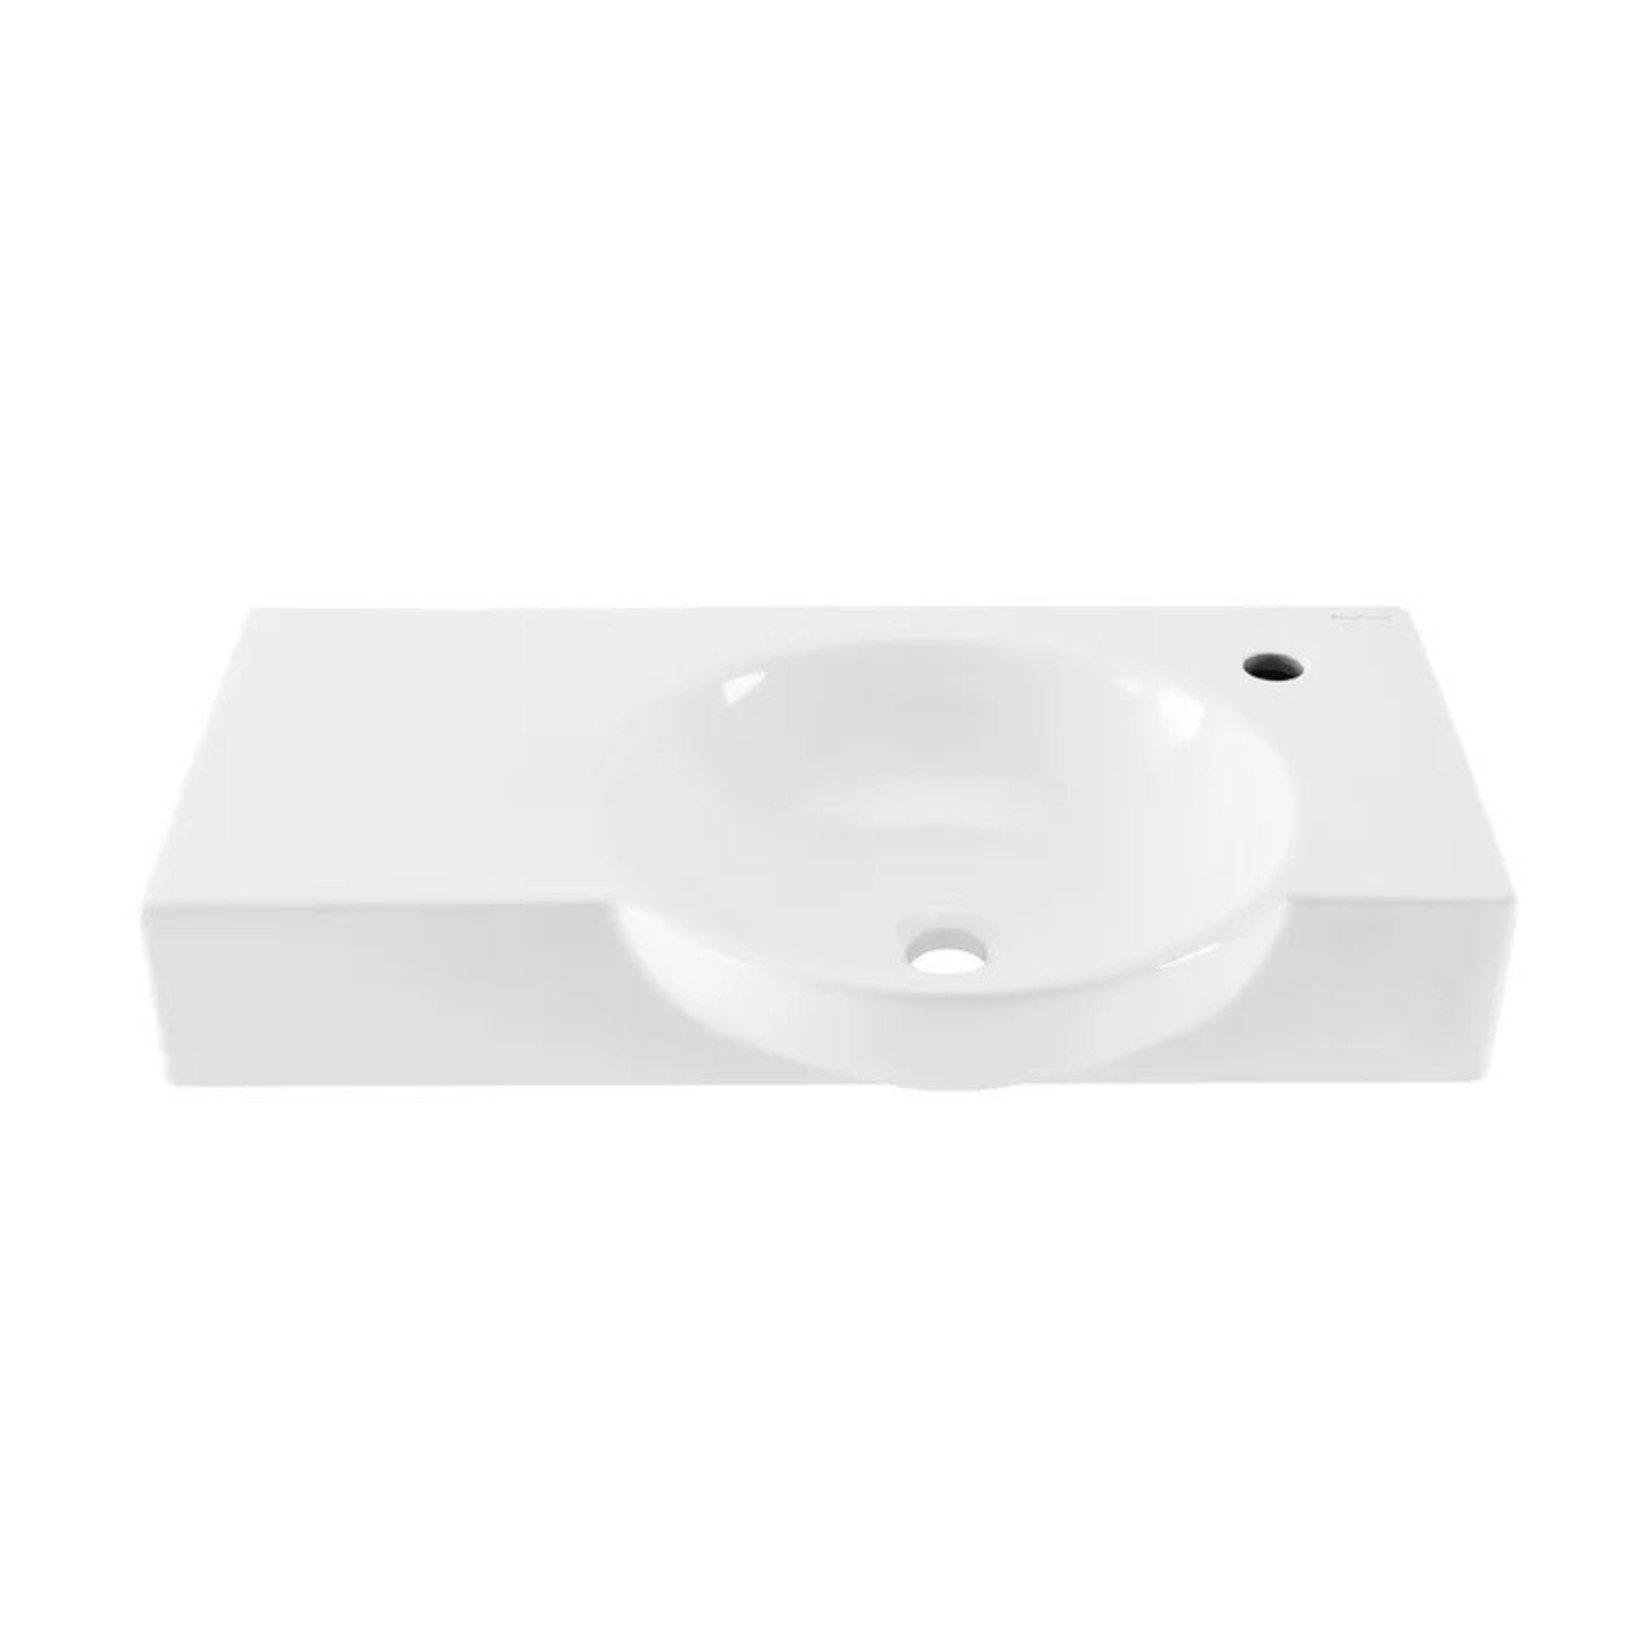 * Château 16.9'' Glossy White Ceramic Rectangular Wall Mount Bathroom Sink (SINK ONLY)